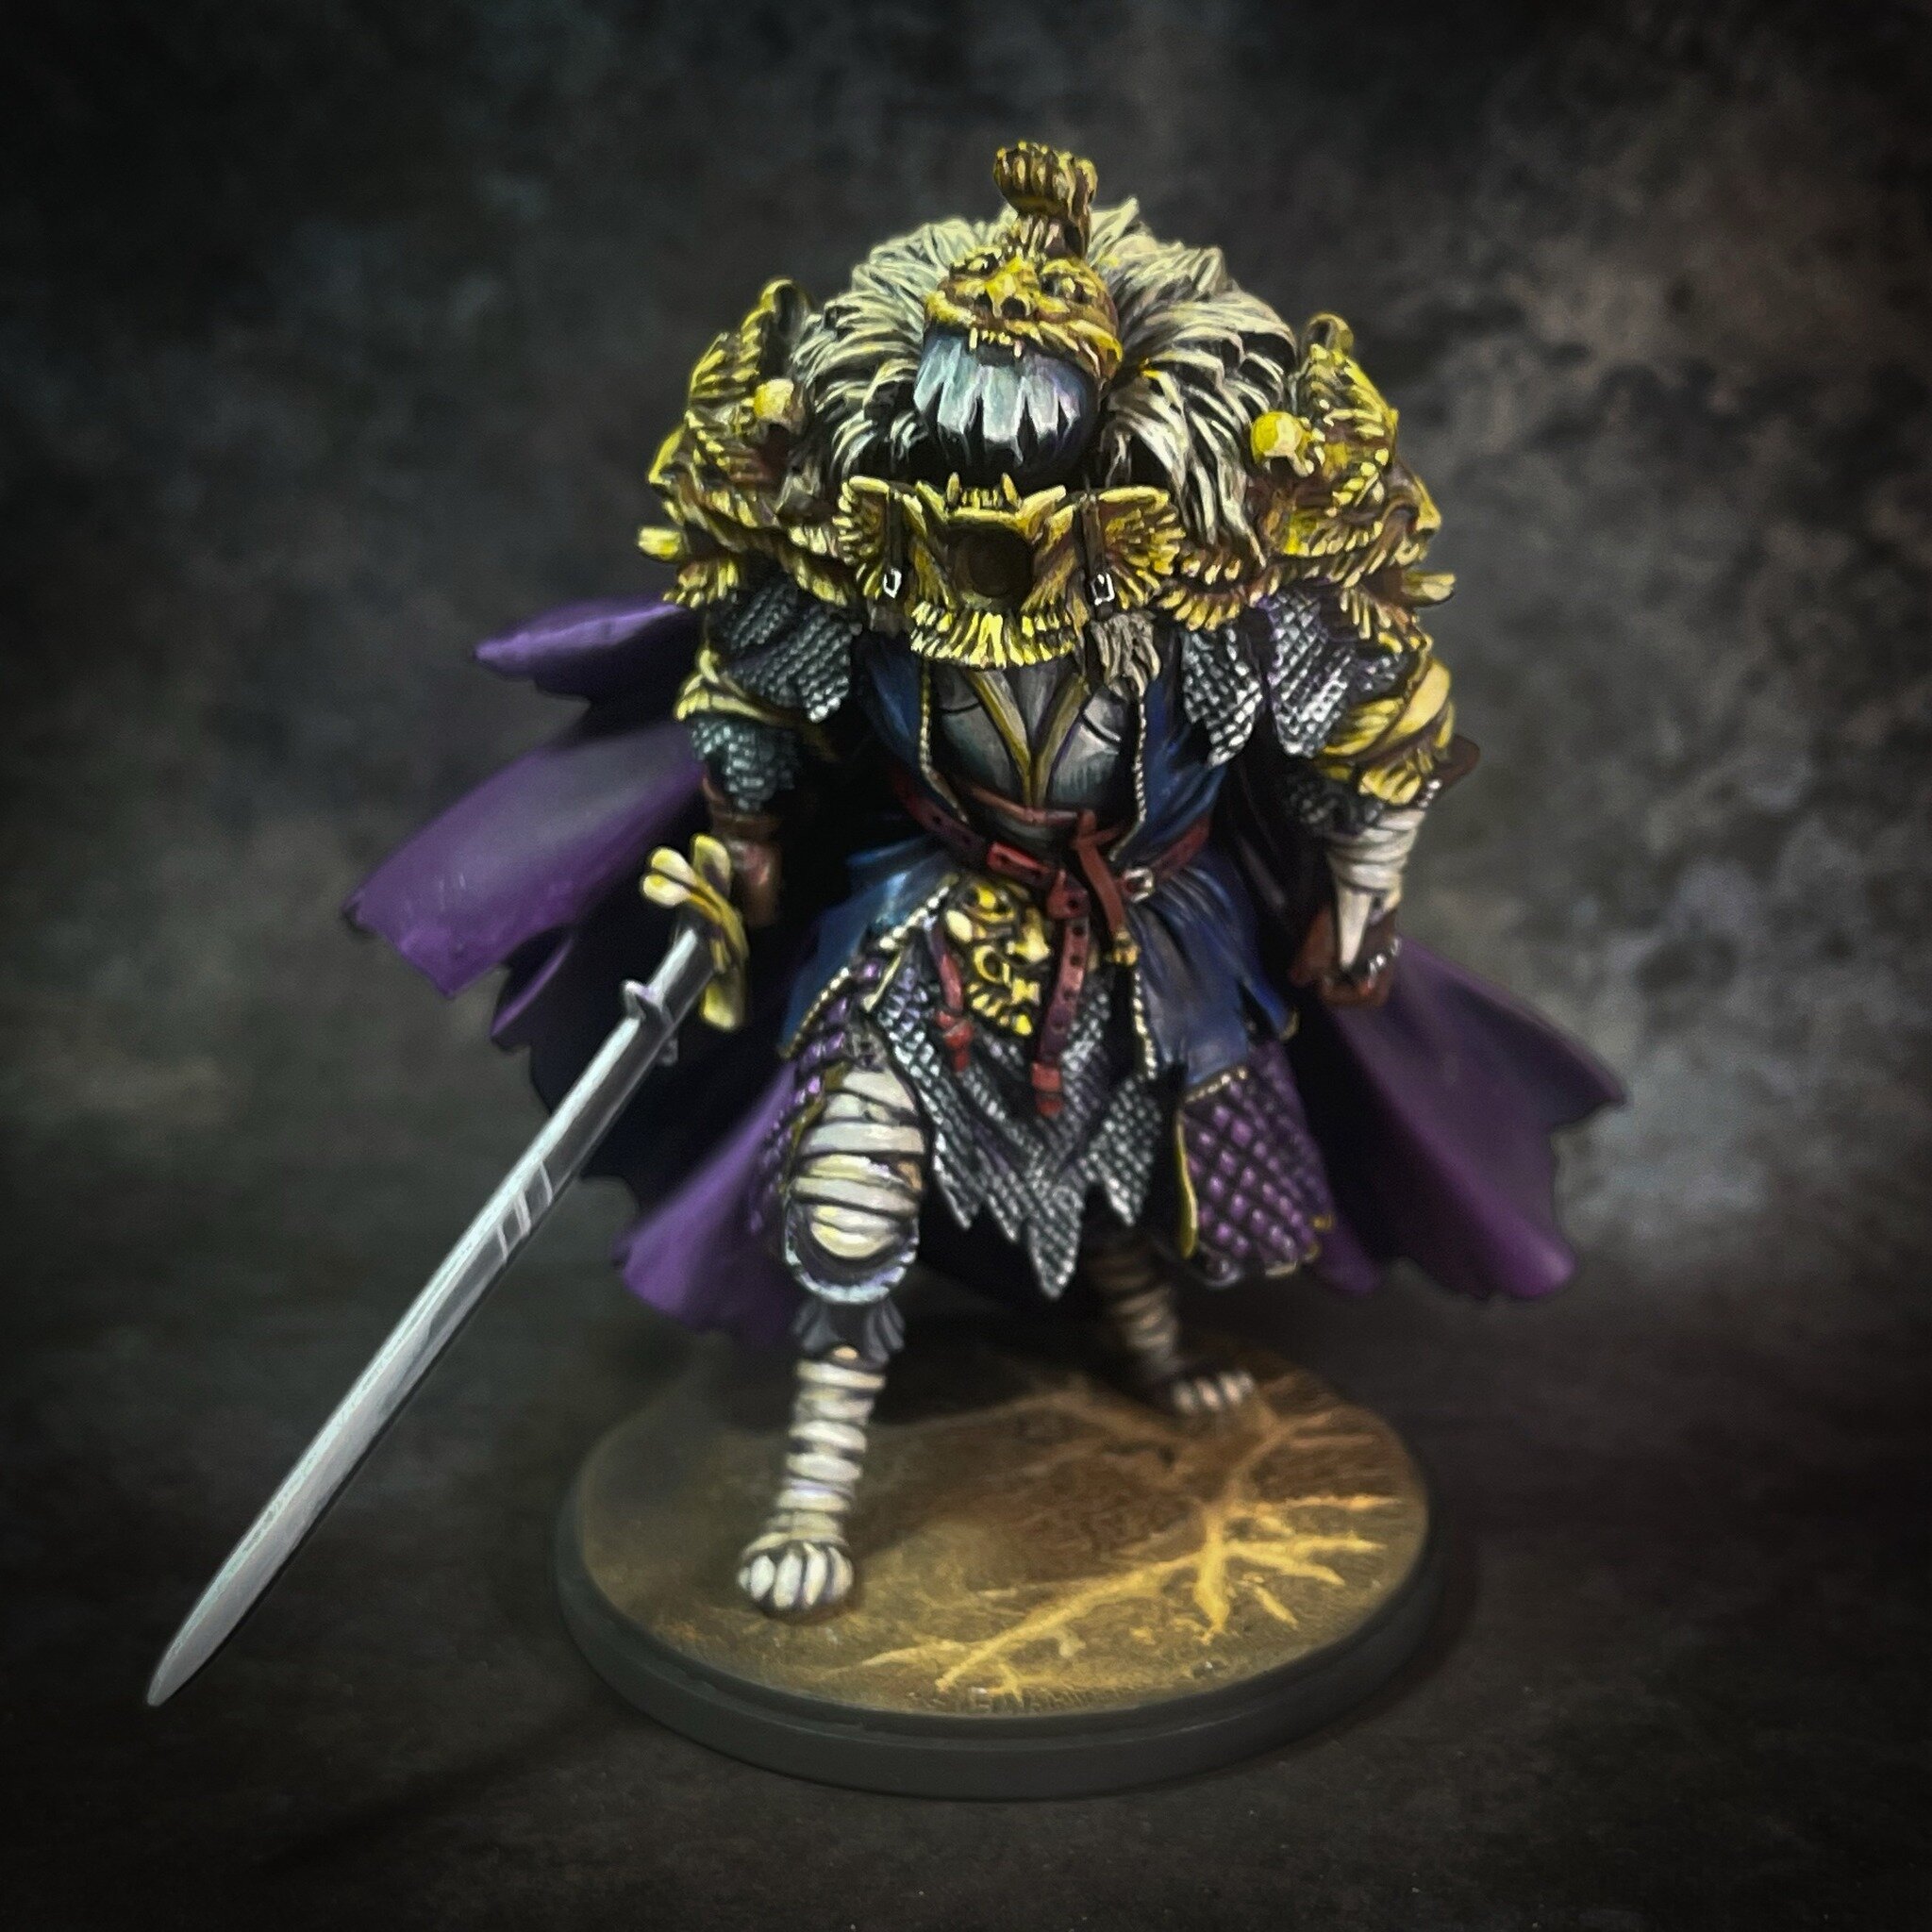 Black Knight from @kingdomdeath this is the first time I&rsquo;ve painted this model using Non-Metallic Metal! I feel pretty happy with it! #kingdomdeath #blackknight #shoshiesminis #miniaturepainting